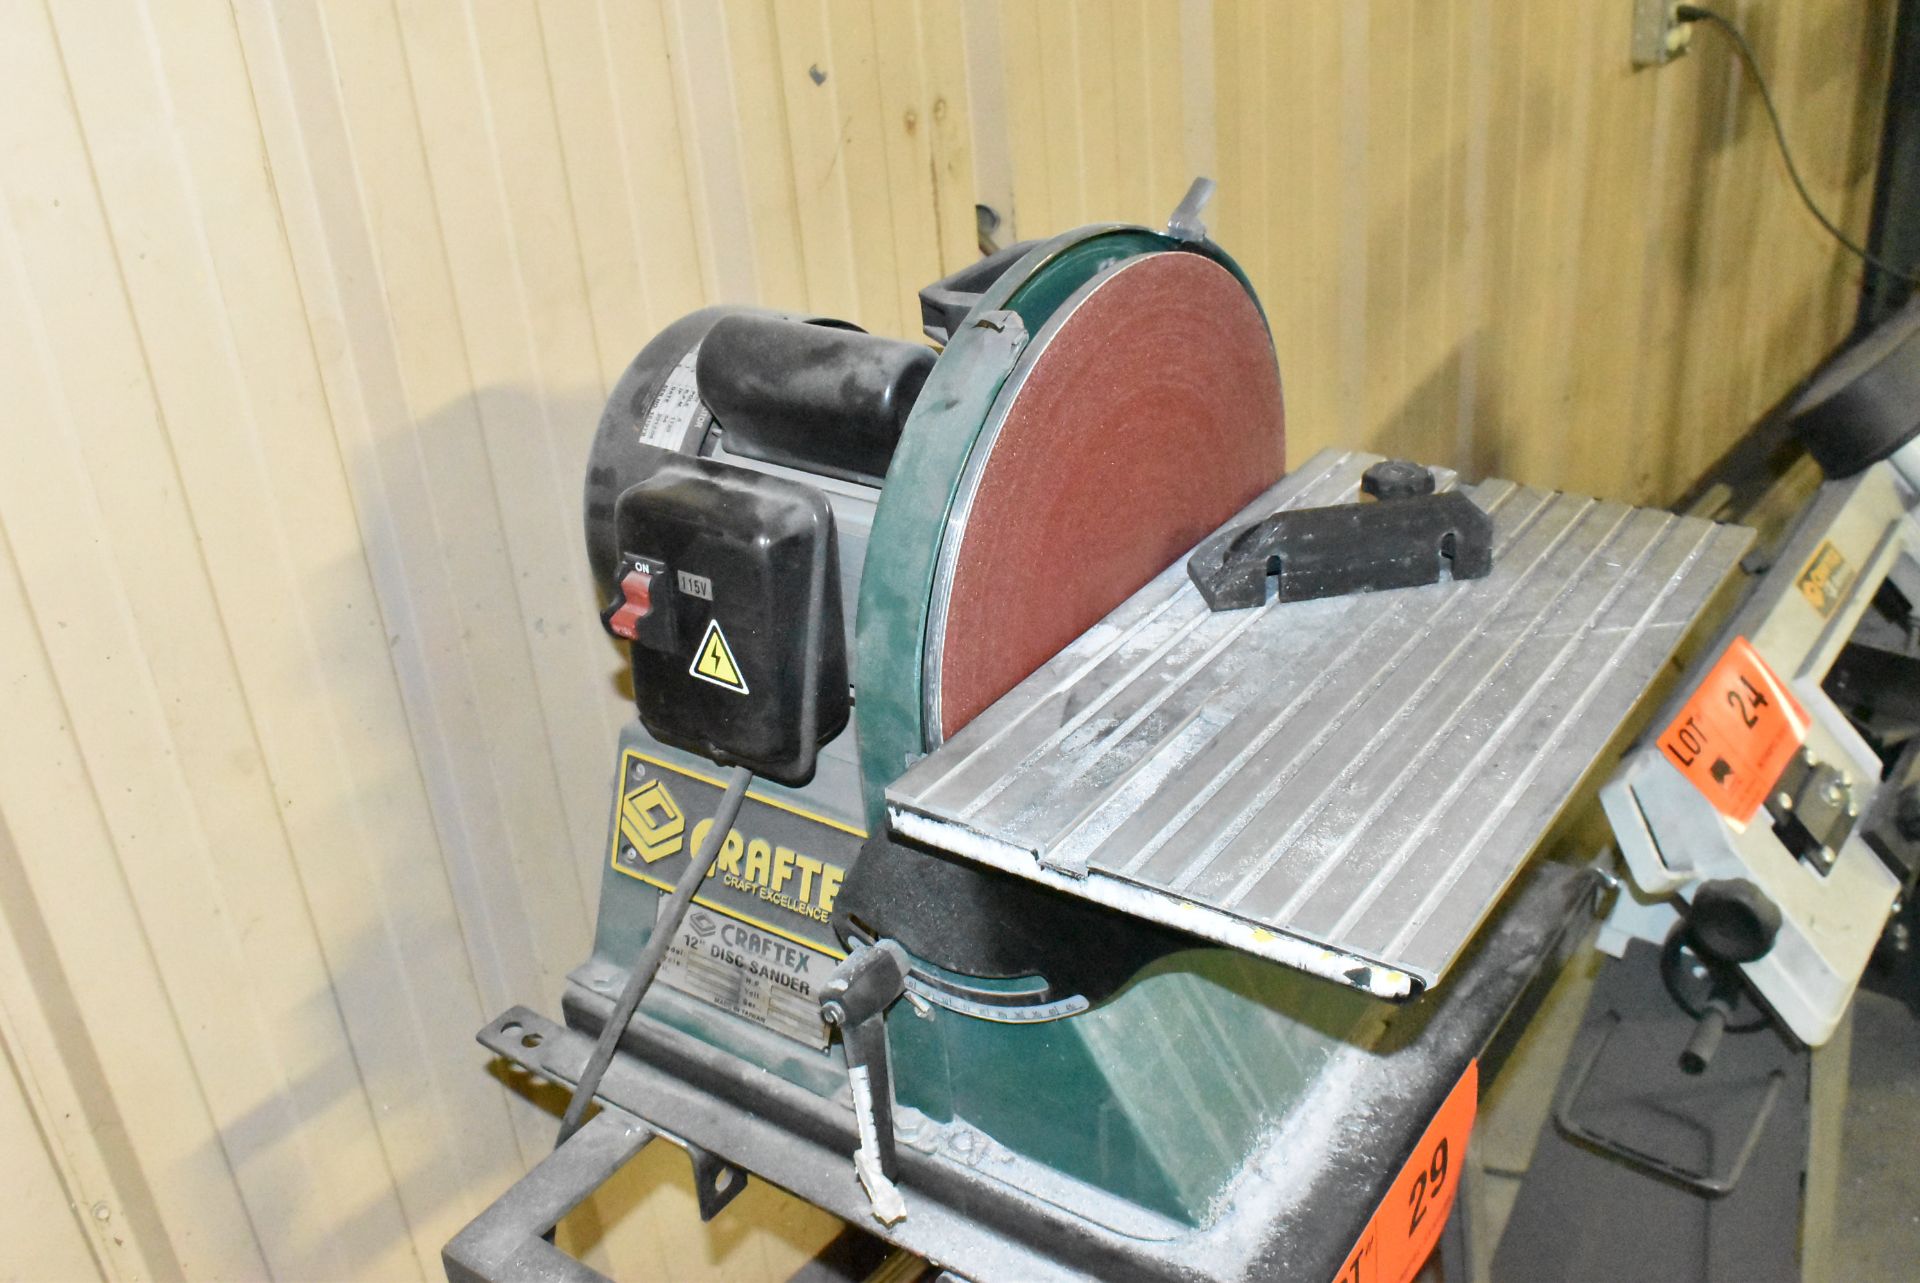 CRAFTEX 12" DISC SANDER, S/N A022236 [RIGGING FOR FOR LOT #29 - $25 CAD PLUS APPLICABLE TAXES] - Image 3 of 5